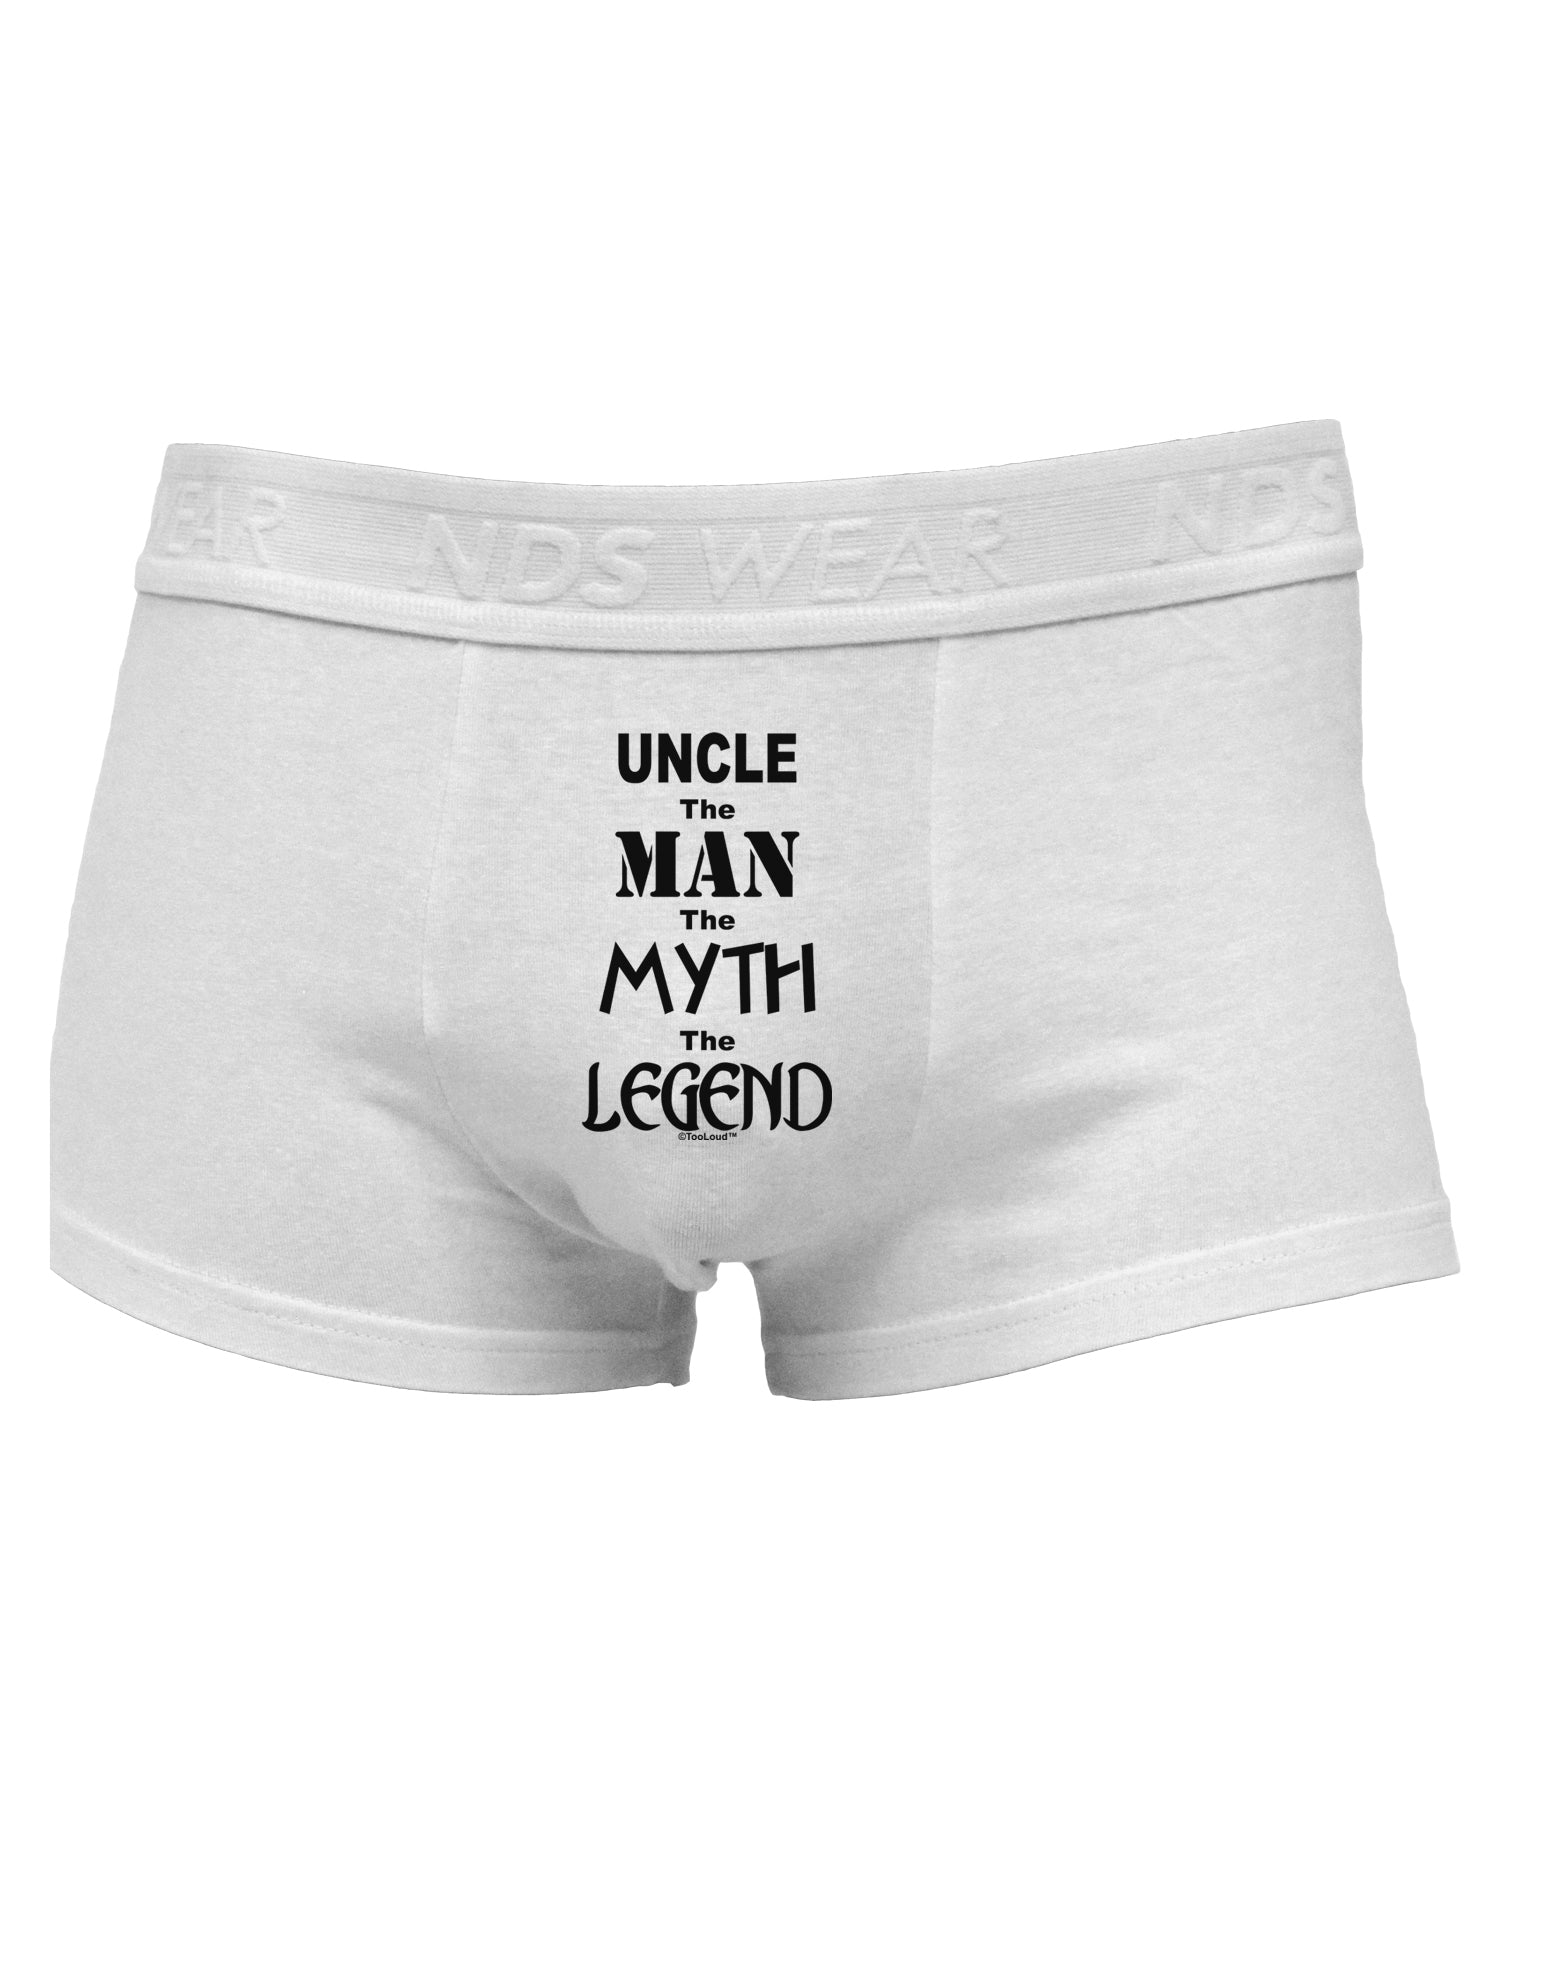 Funny Men's Boxer Briefs. the Man, the Legend Boxers, Gift for Him